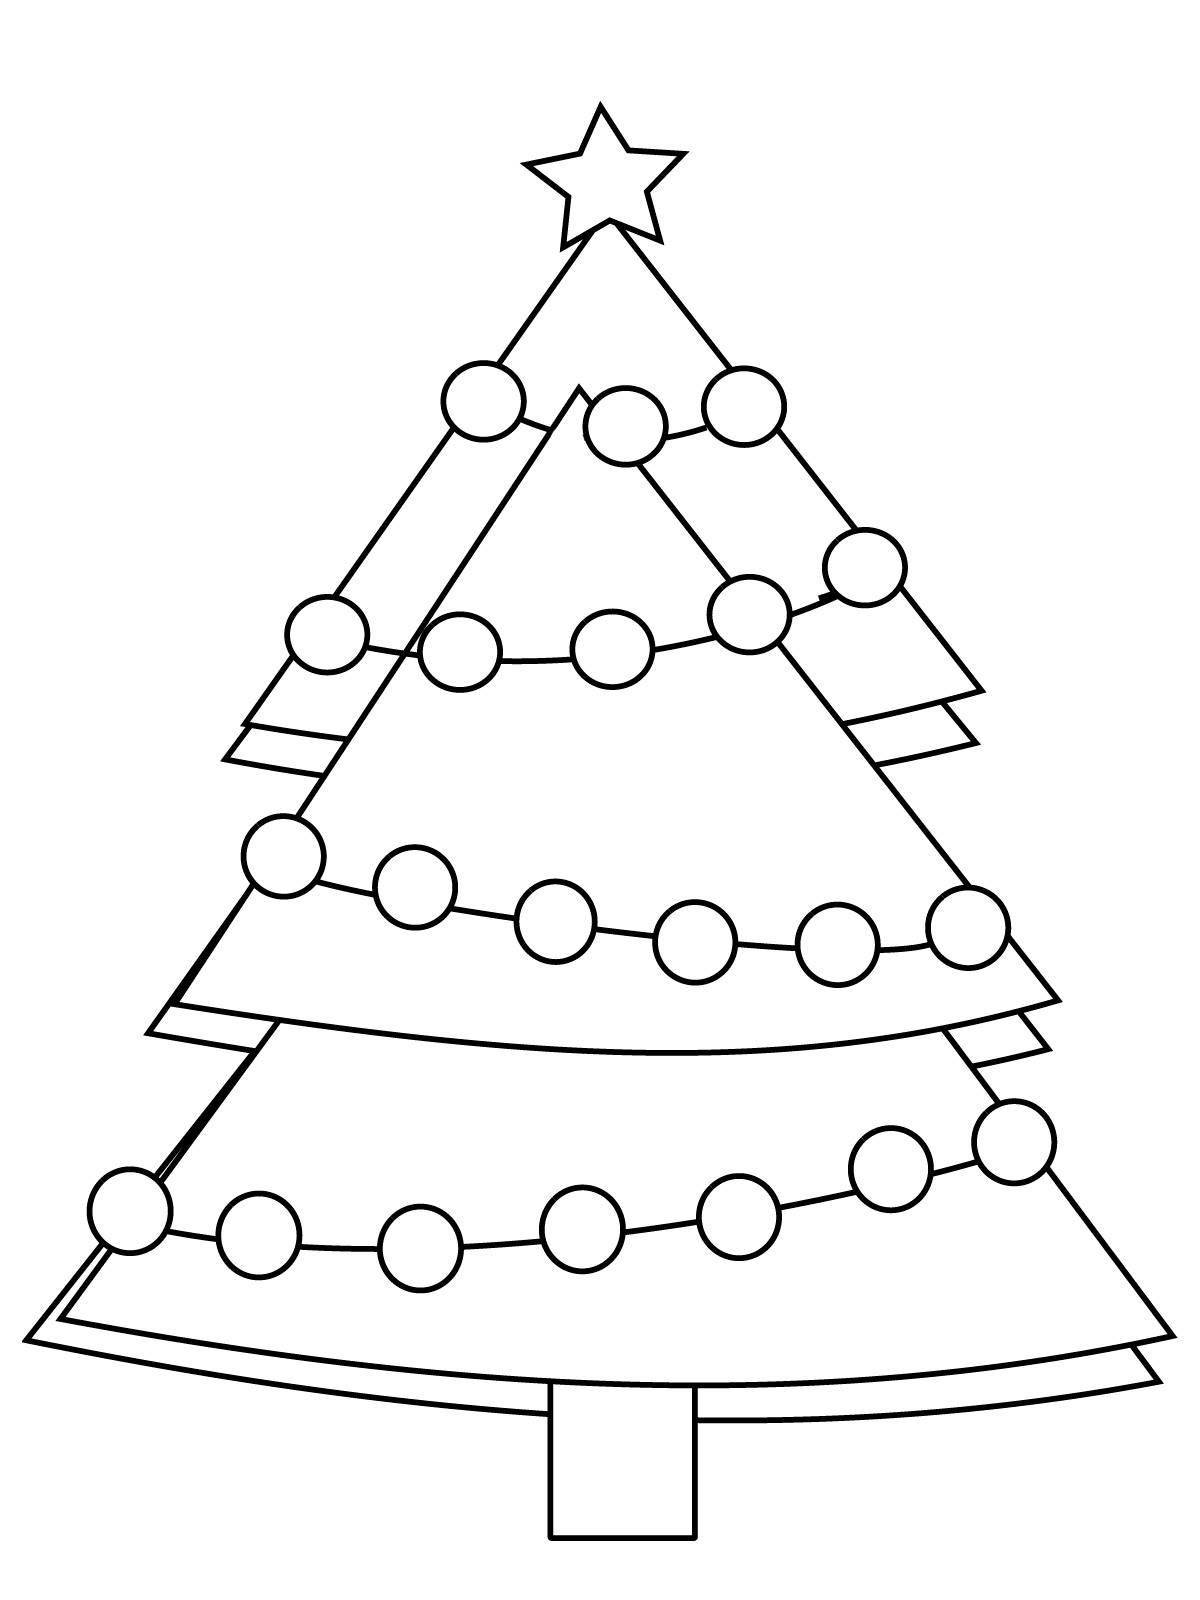 Coloured Explosive Tree Coloring Page for 2-3 year olds